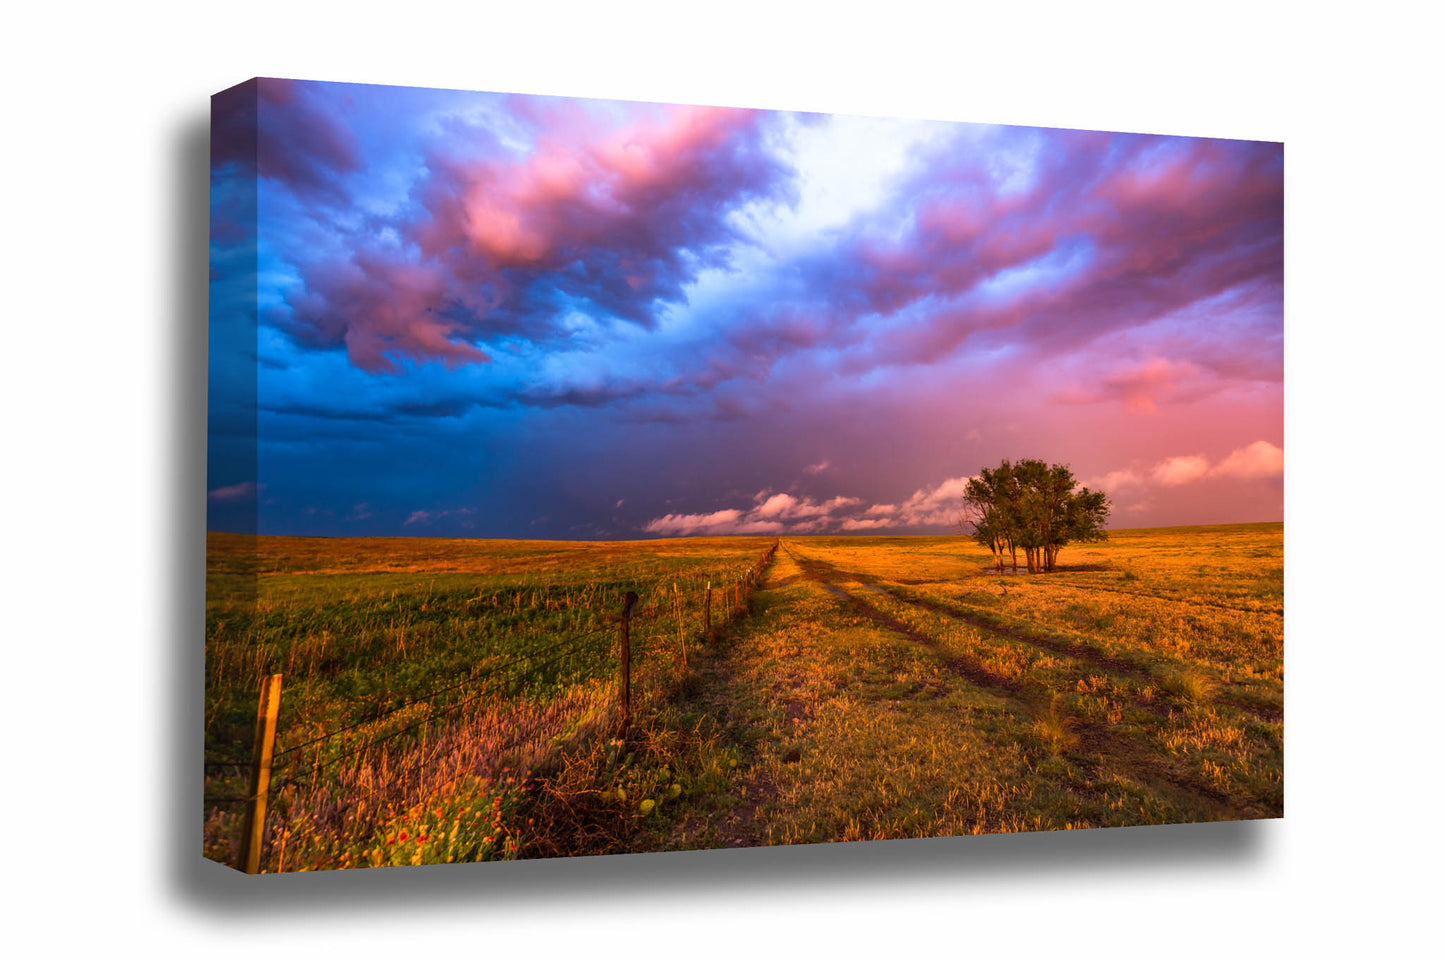 Great plains canvas wall art of a barbed wire fence, worn path and a grove of trees underneath a stormy sky on a spring day in the Oklahoma panhandle by Sean Ramsey of Southern Plains Photography.